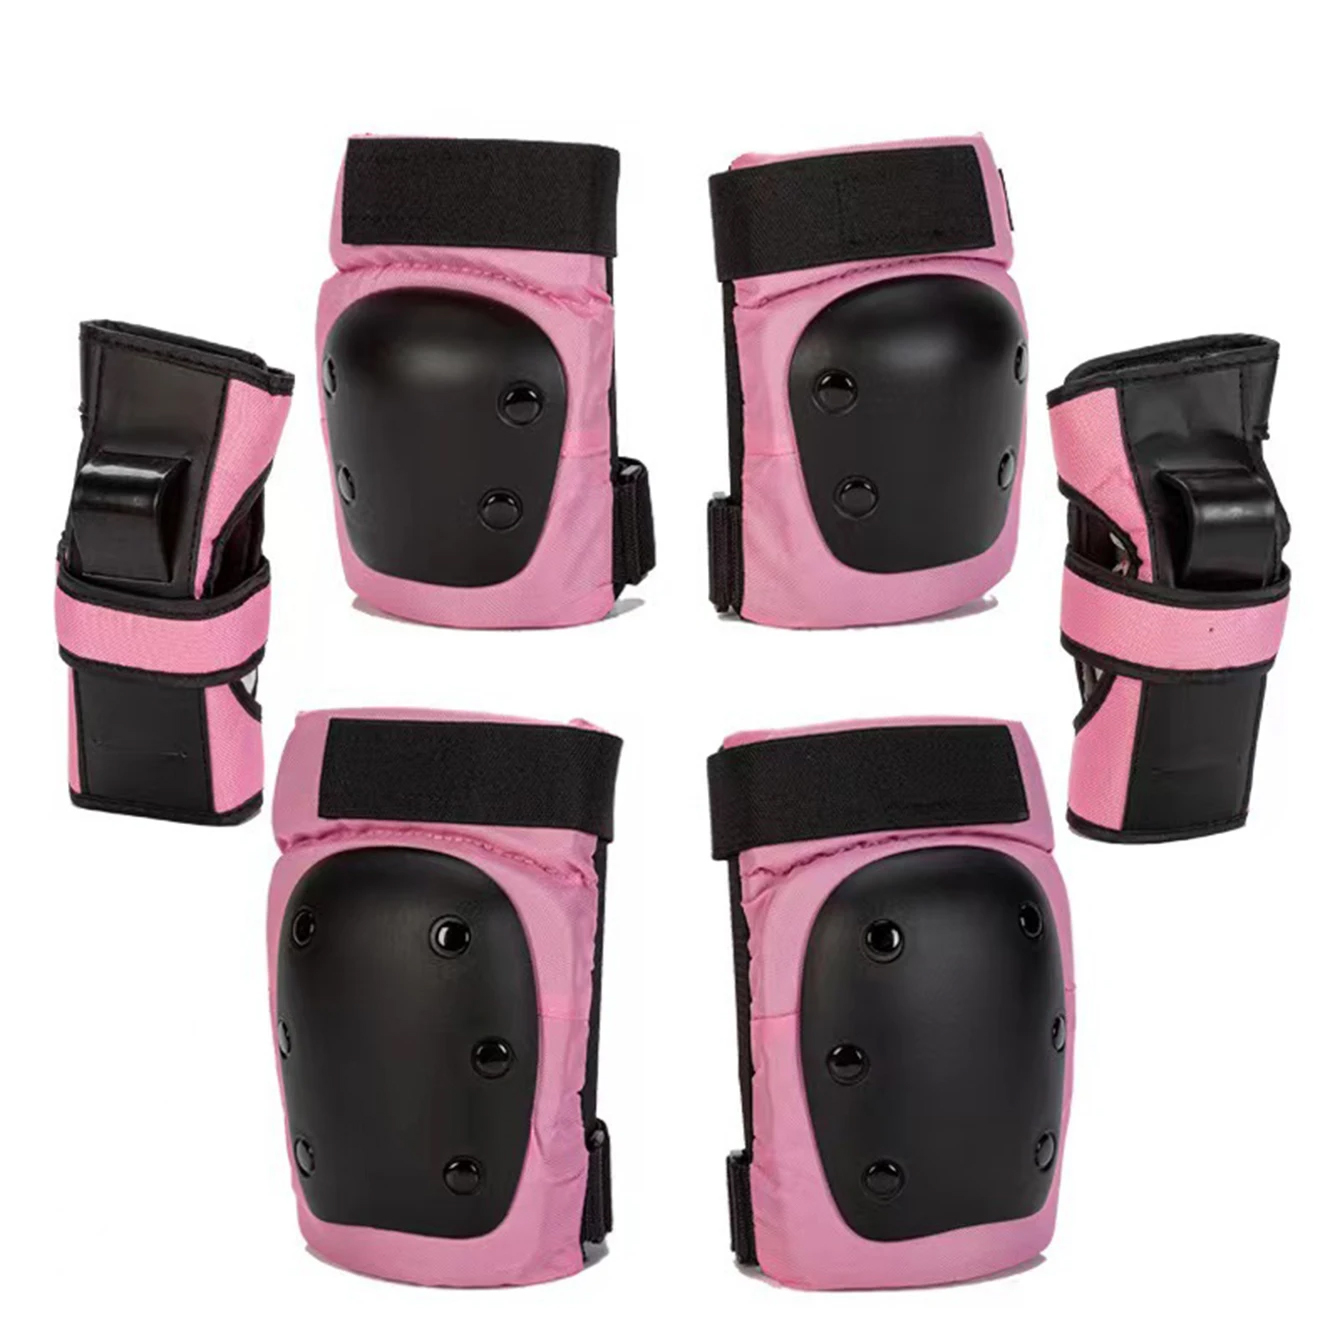 6Pcs/set Adult Child Knee/Elbow Pads With Kneesavers Elbowsavers Wrist Savers Protective Gears For Skateboard Bicycle Roller